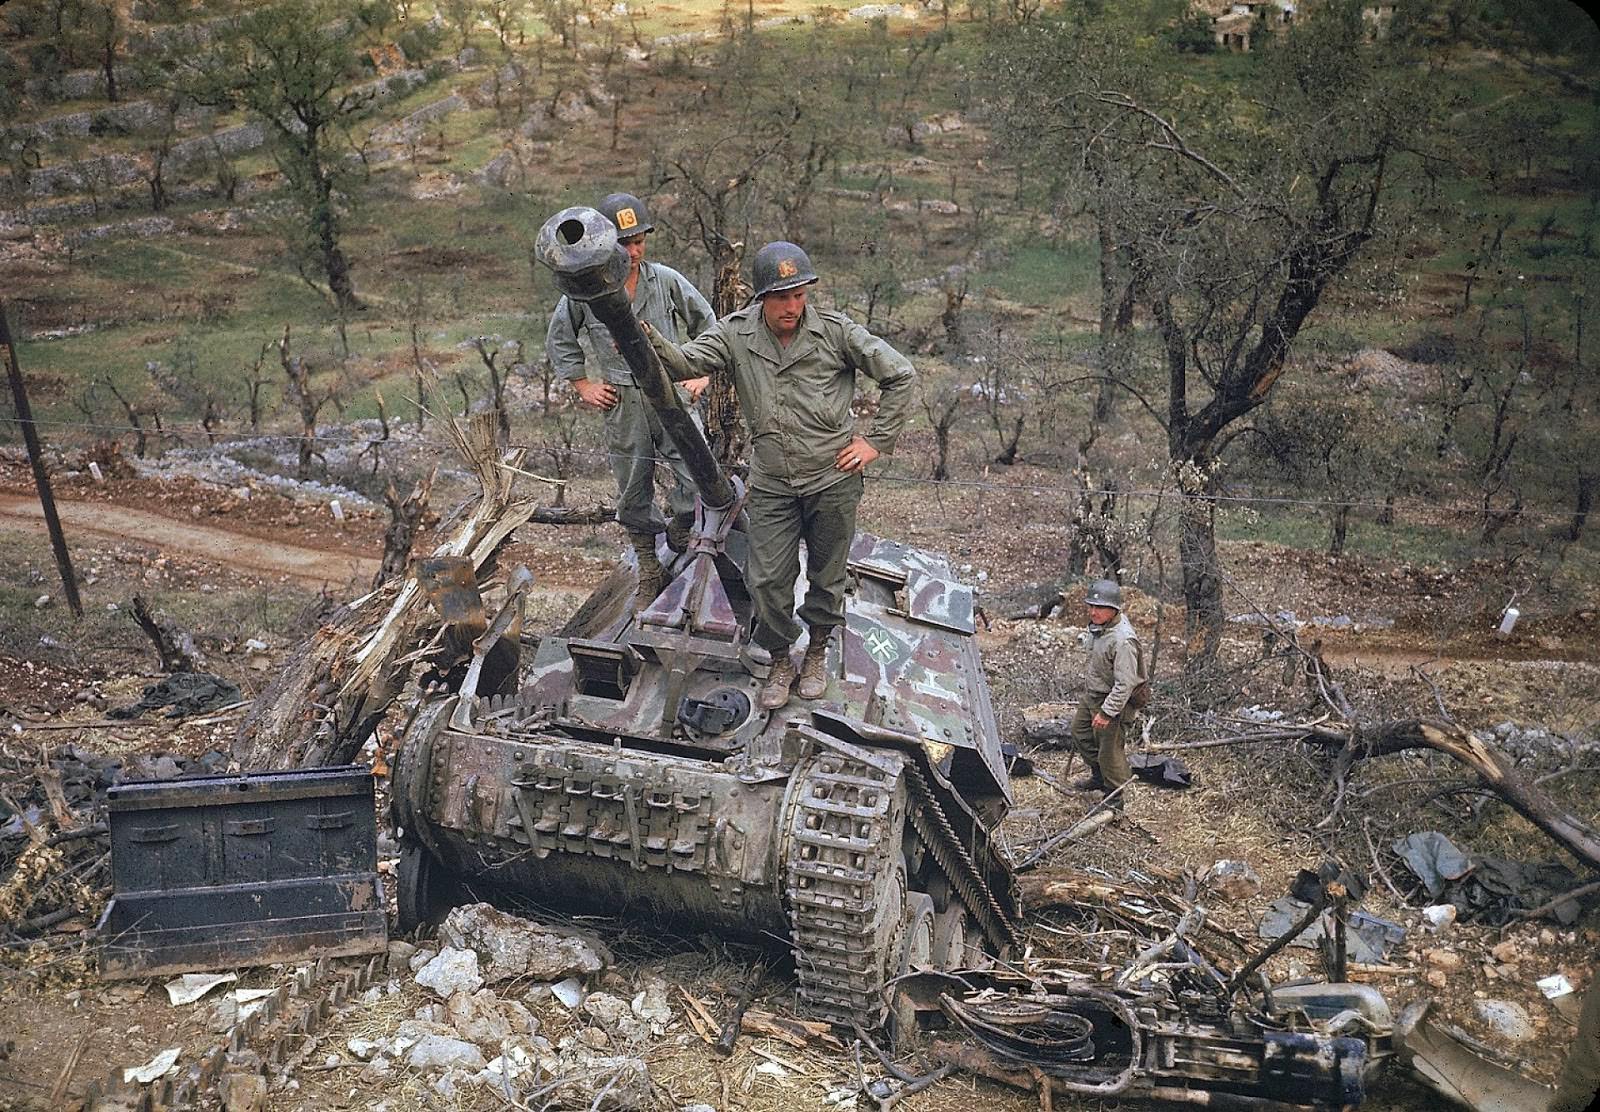 Two soldiers standing on the tank and assessing the destructions.